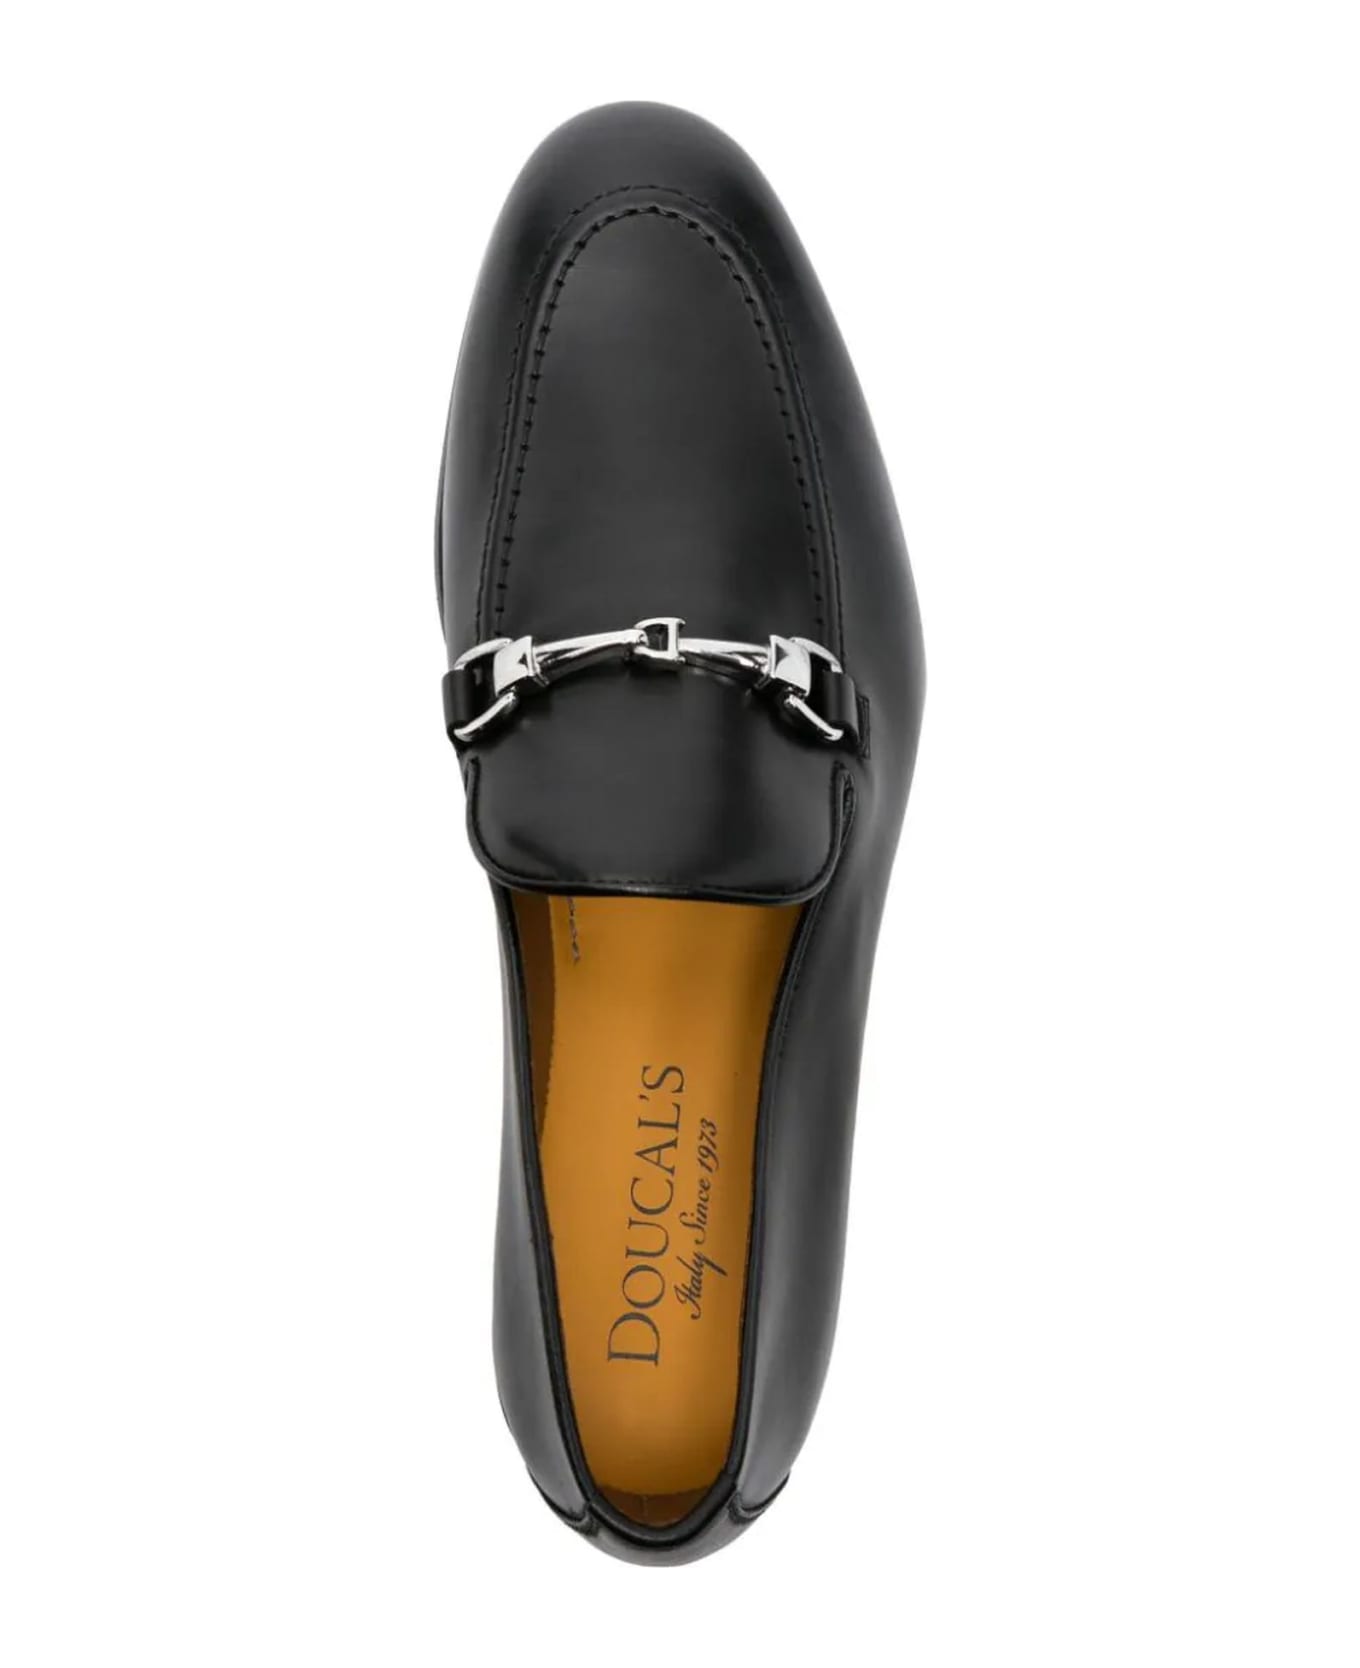 Doucal's Black Leather Loafer - Nero